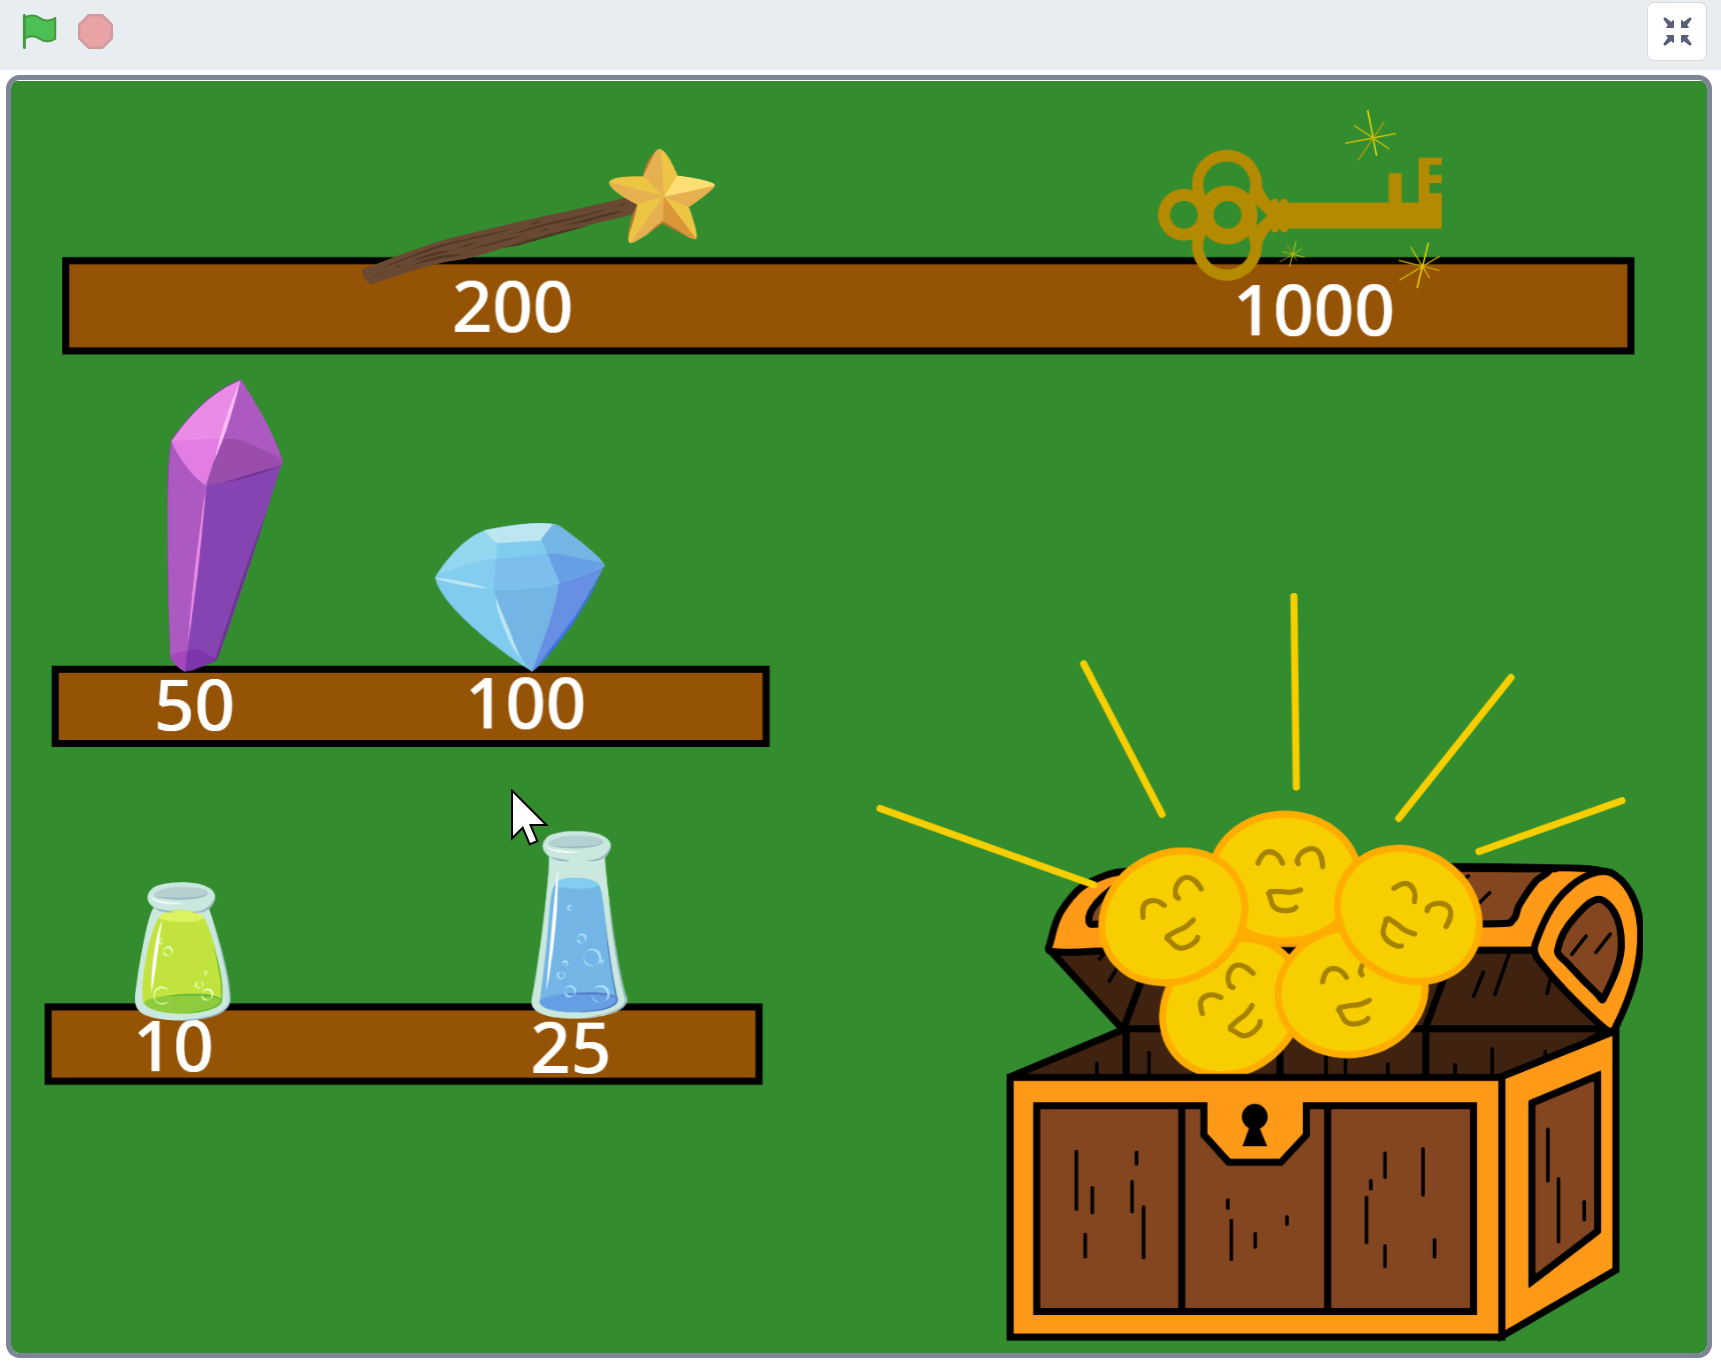 How to Make a Clicker Game on Scratch